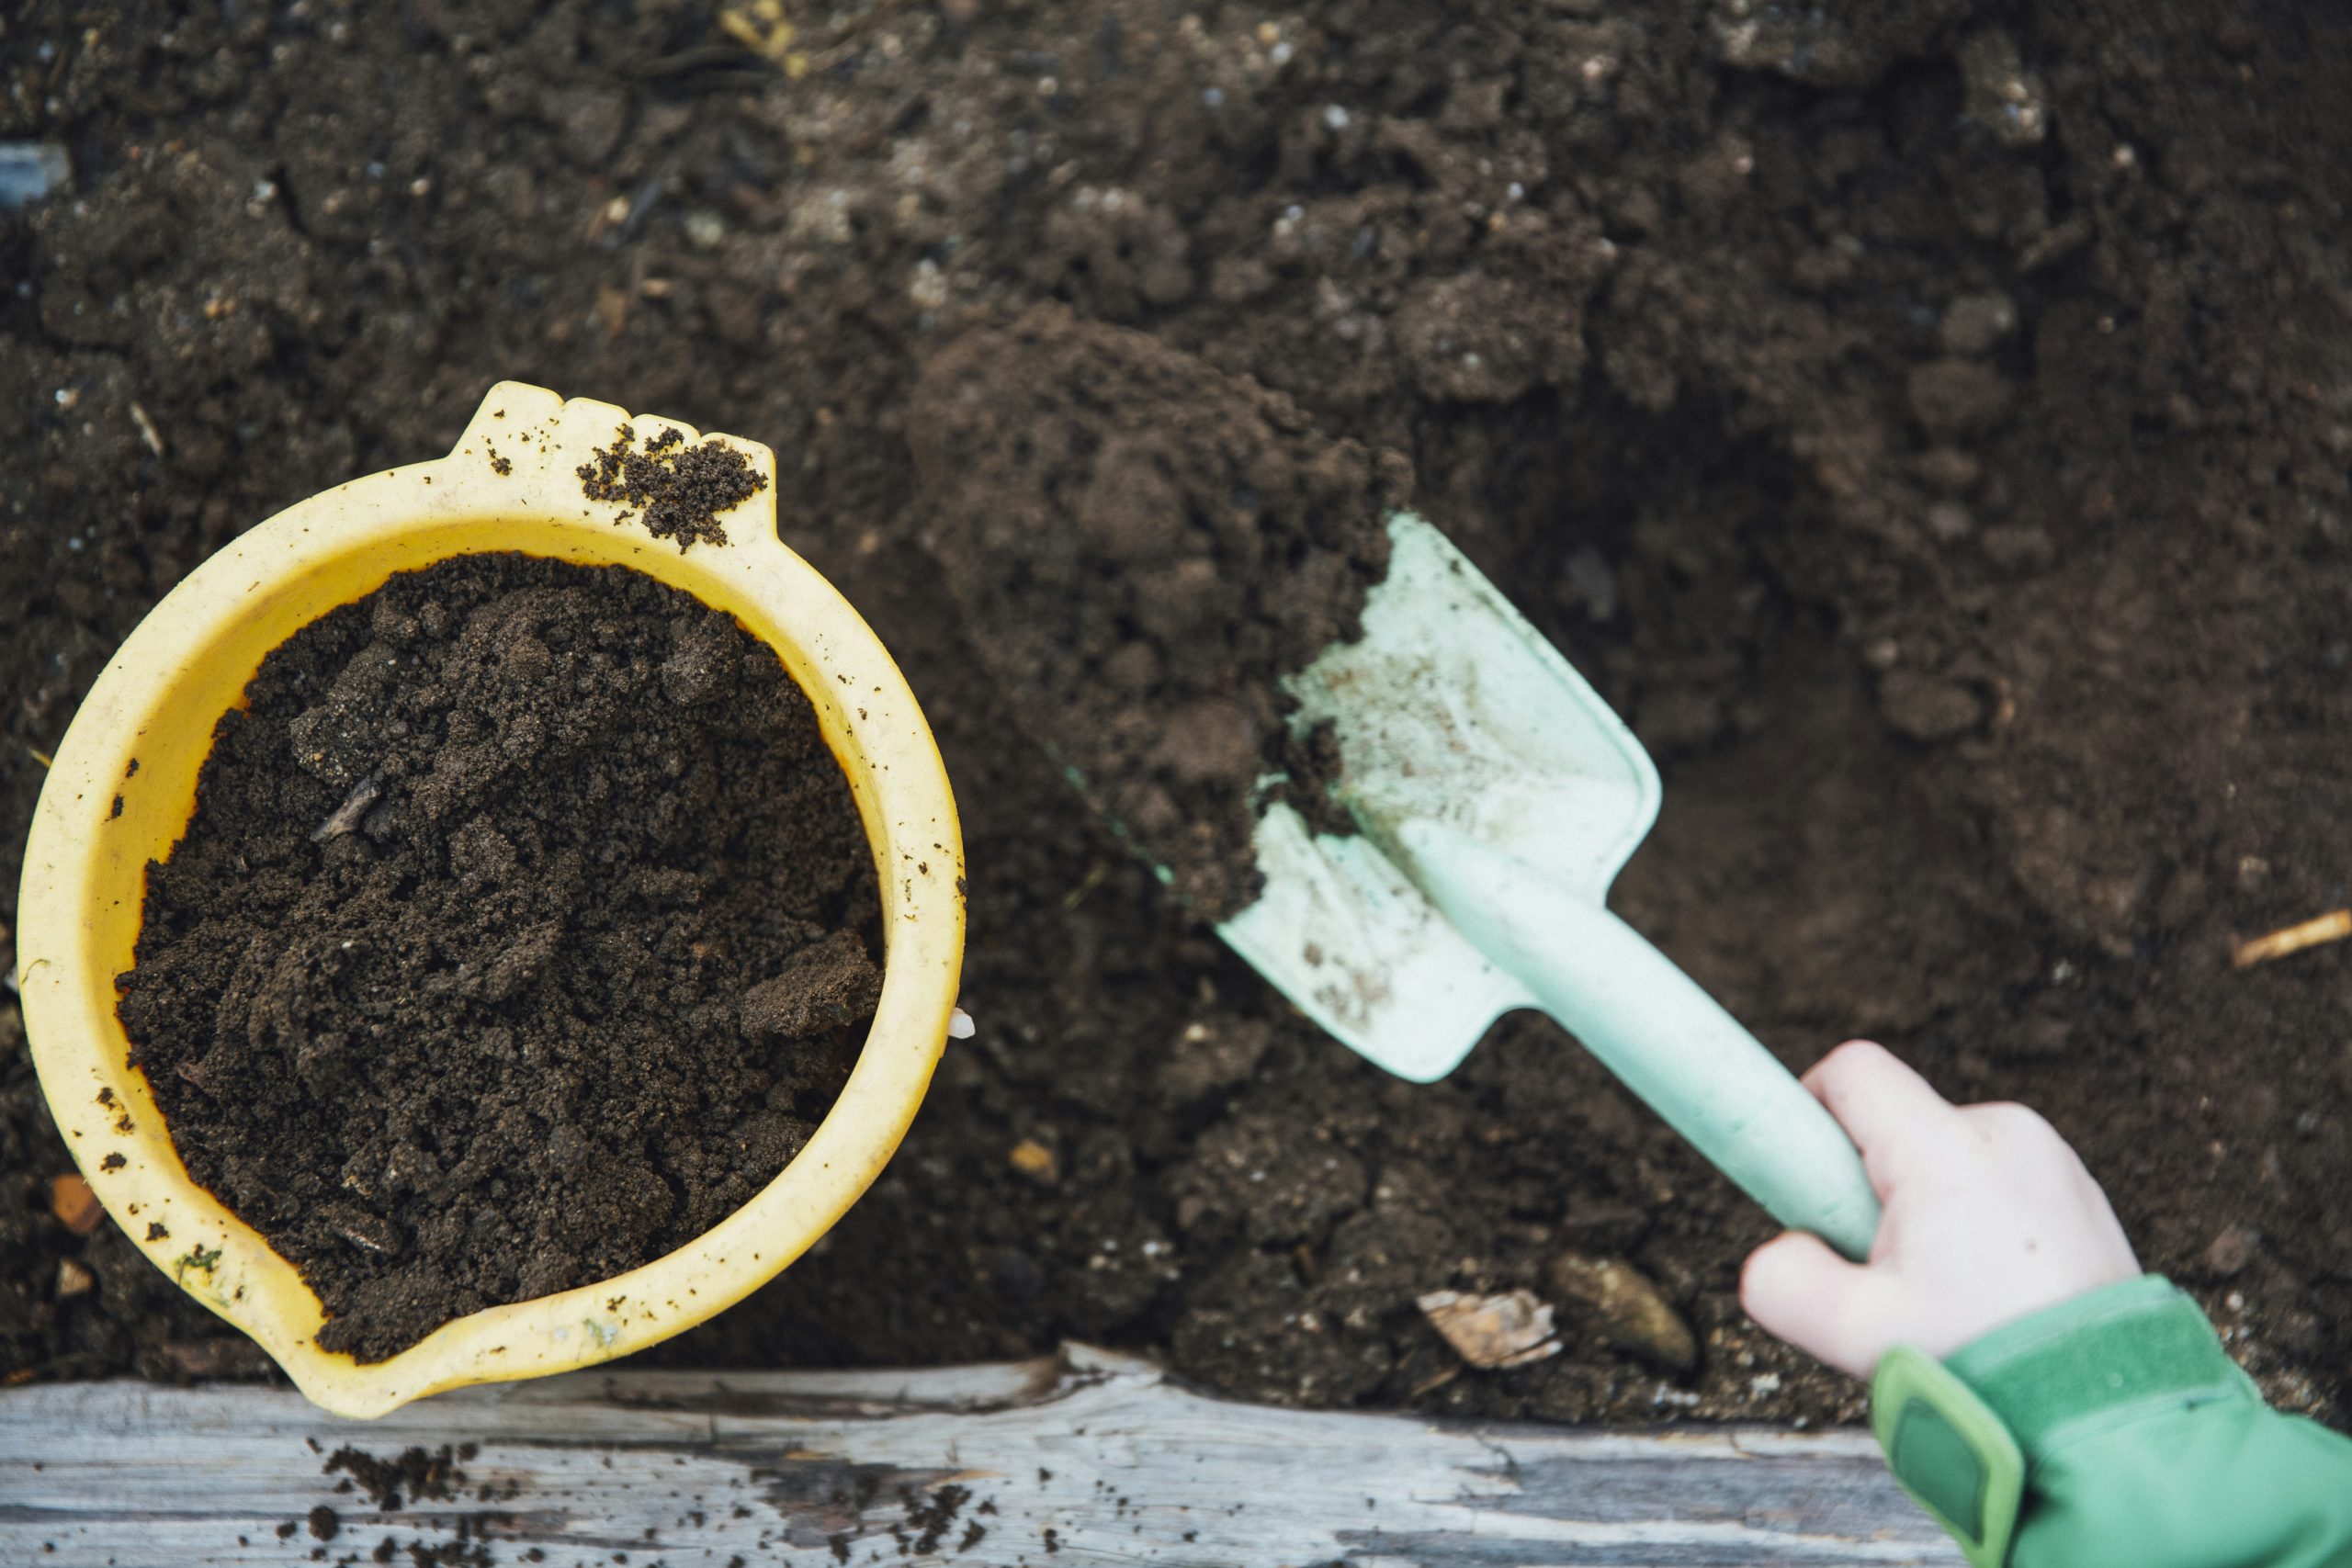 How Do I Ensure My Compost Is Organic?